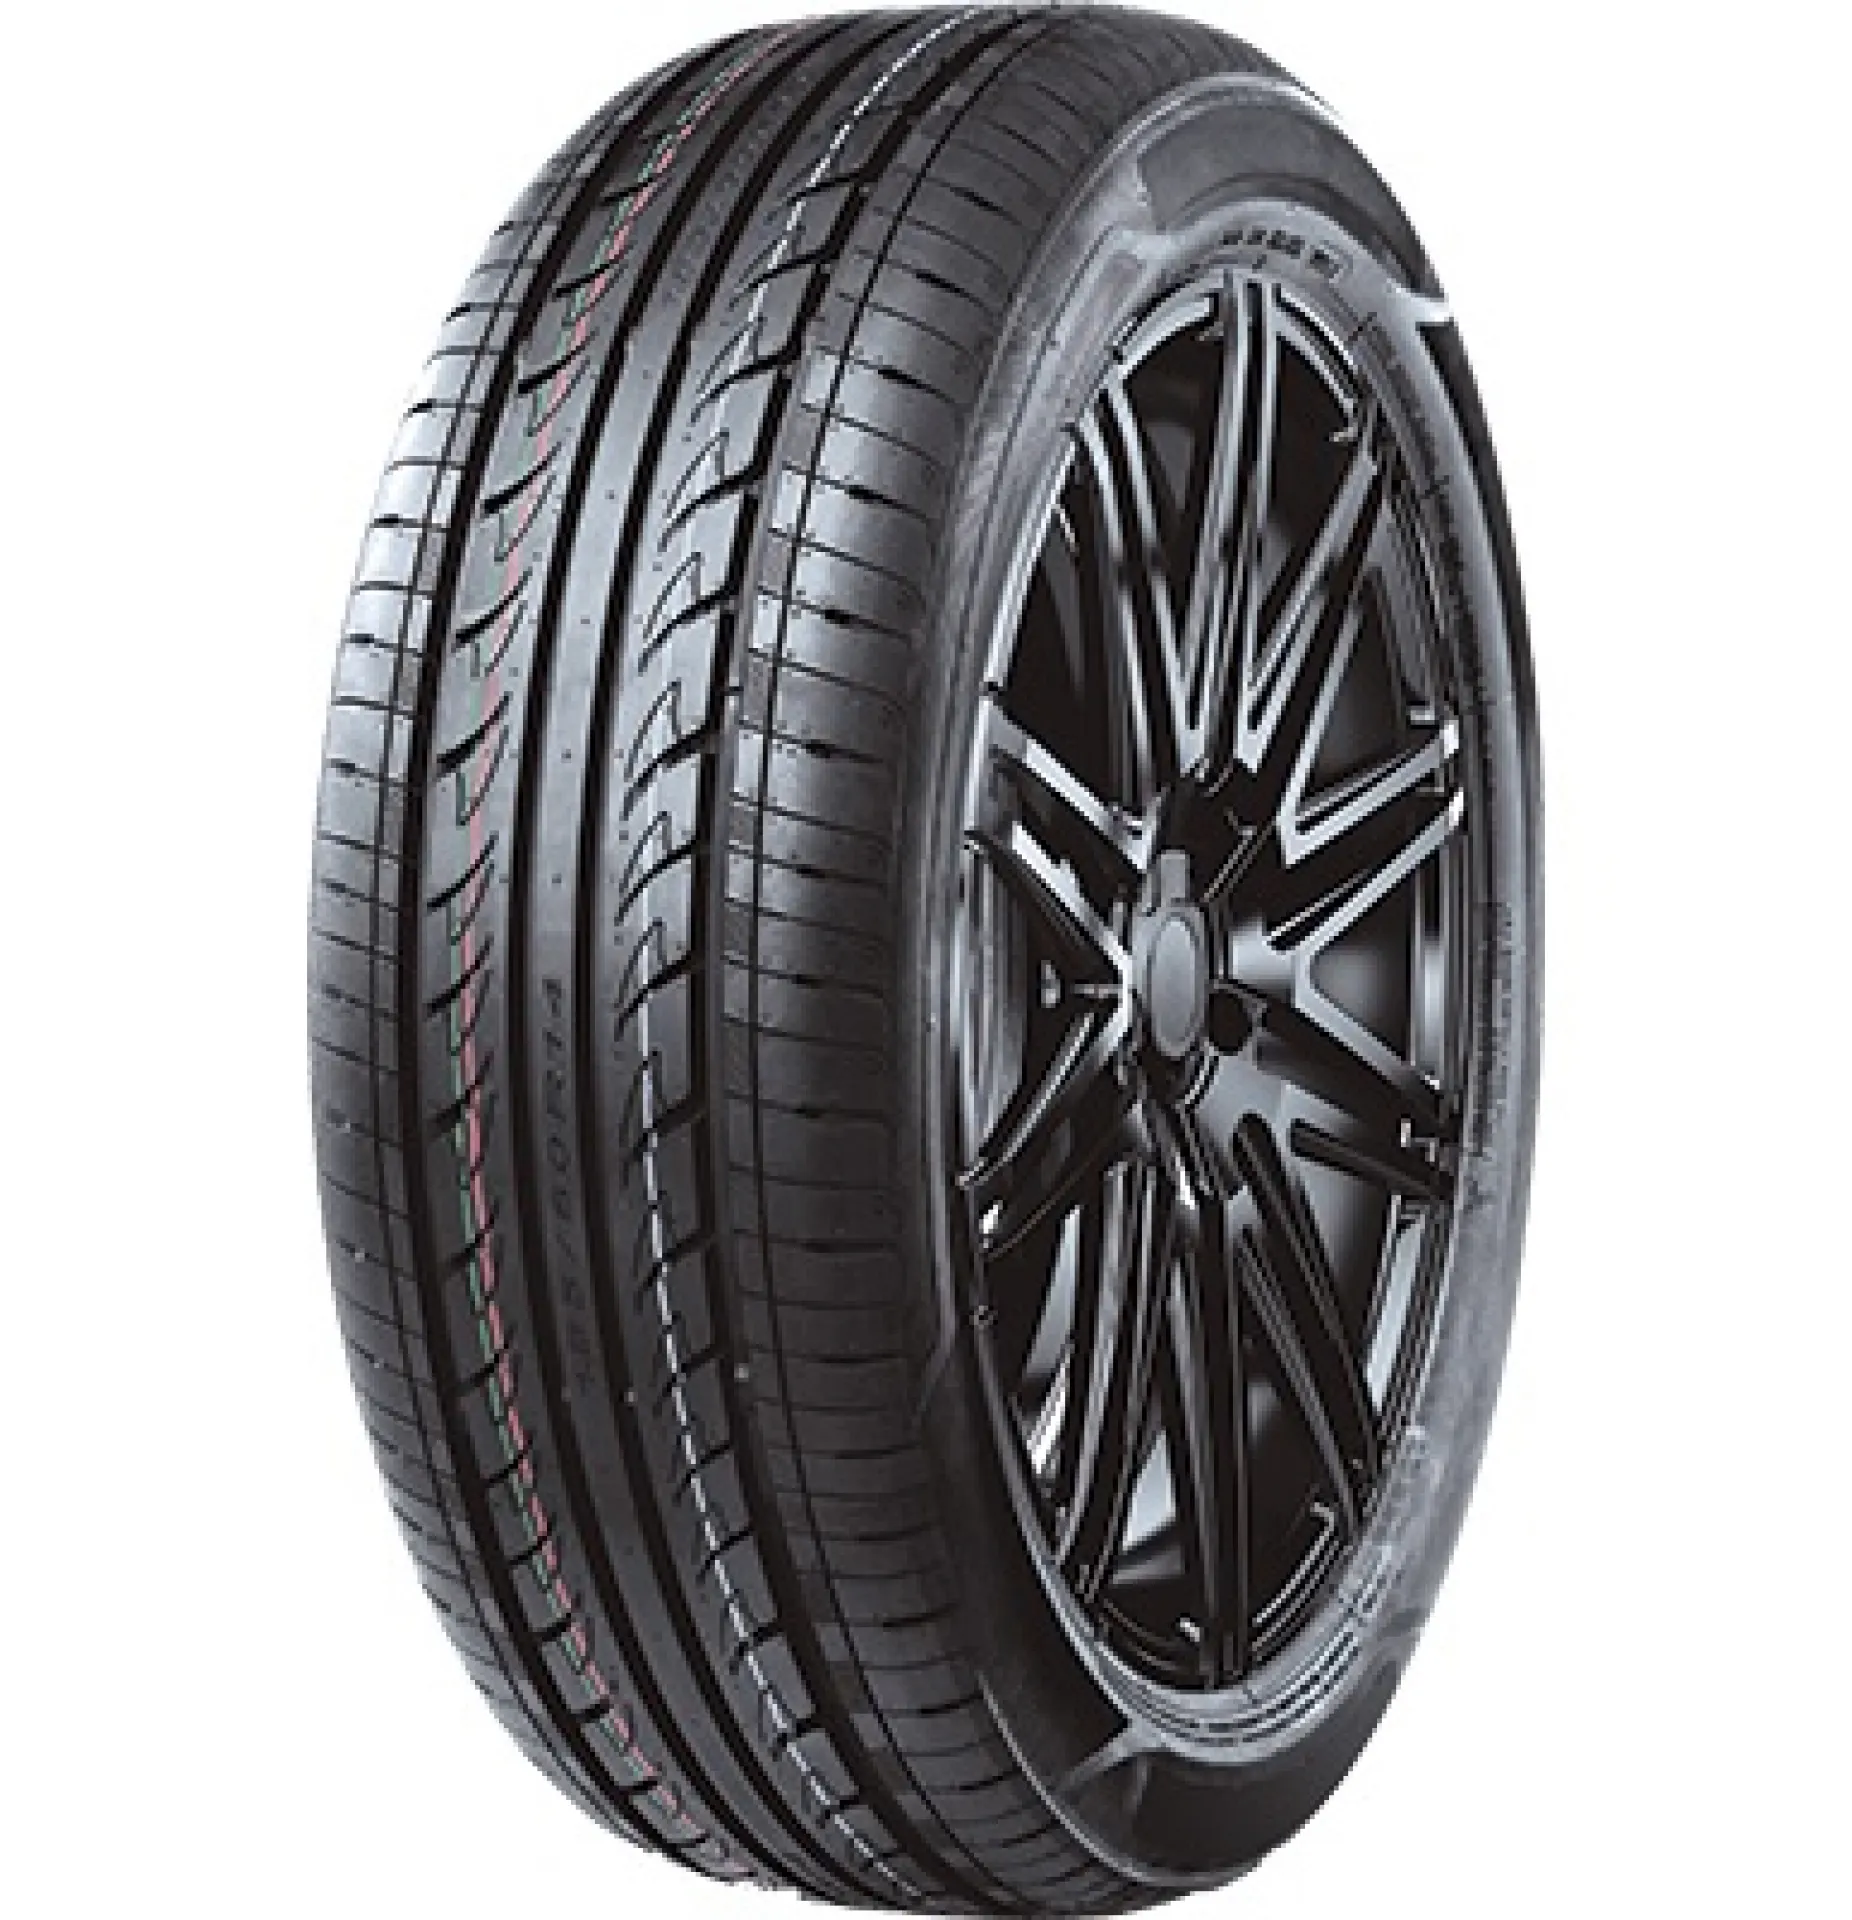 T-Tyre Two 205/70R15 100H XL